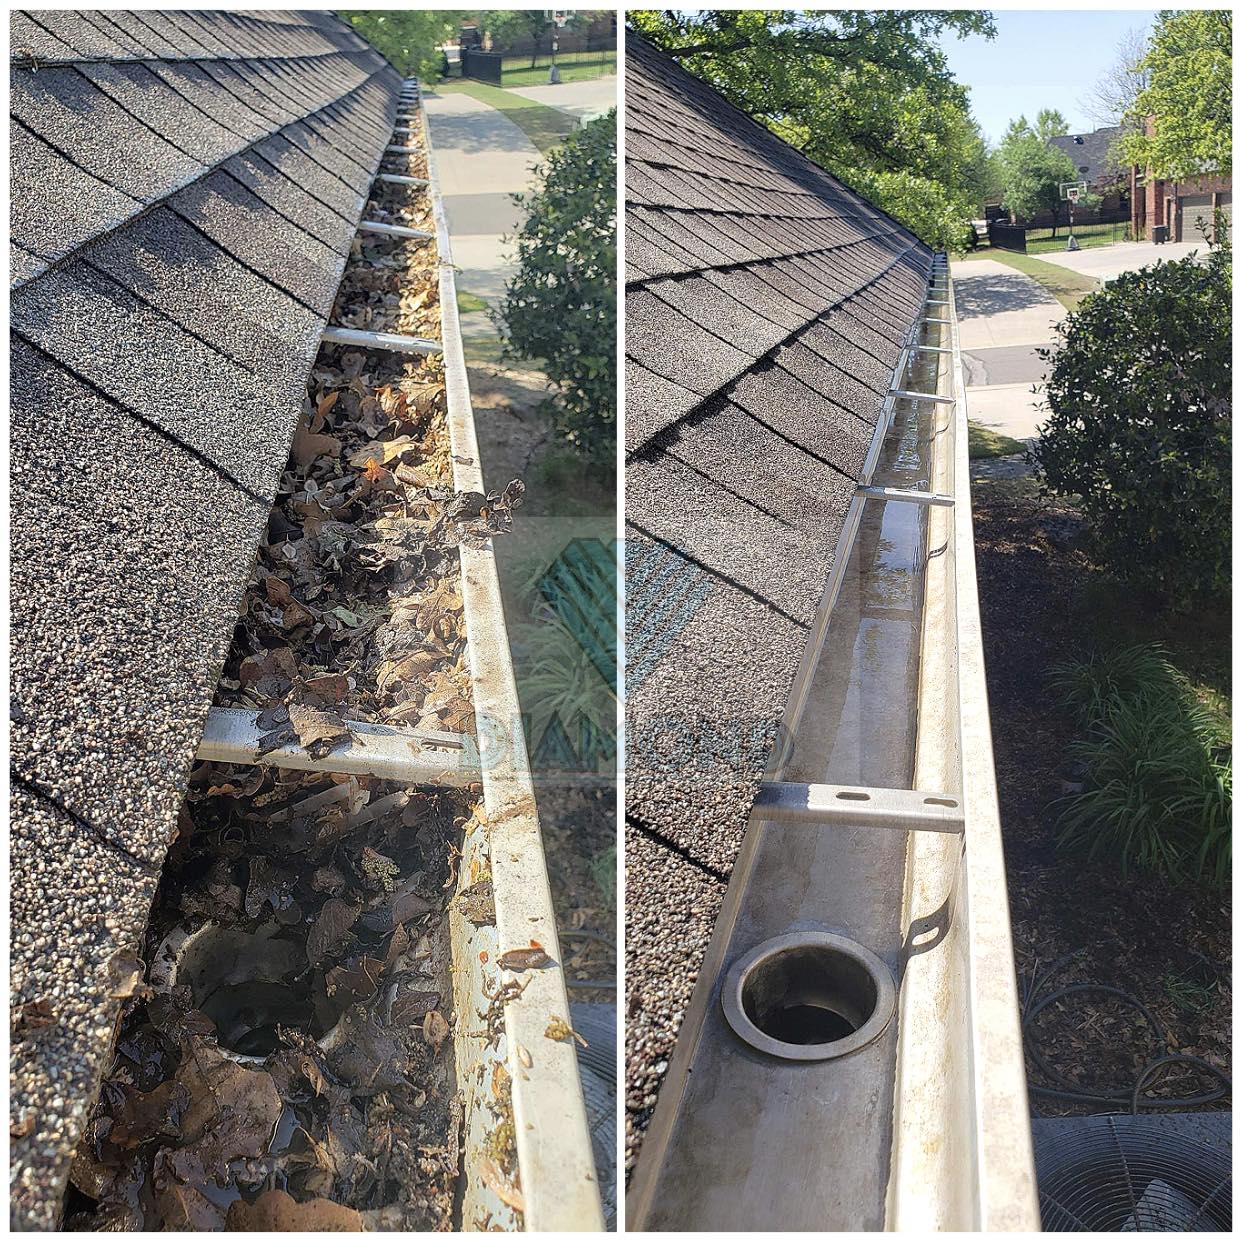 Dirty Gutter Cleaning and Driveway Pressure Wash and Rinse in Edmond, Ok